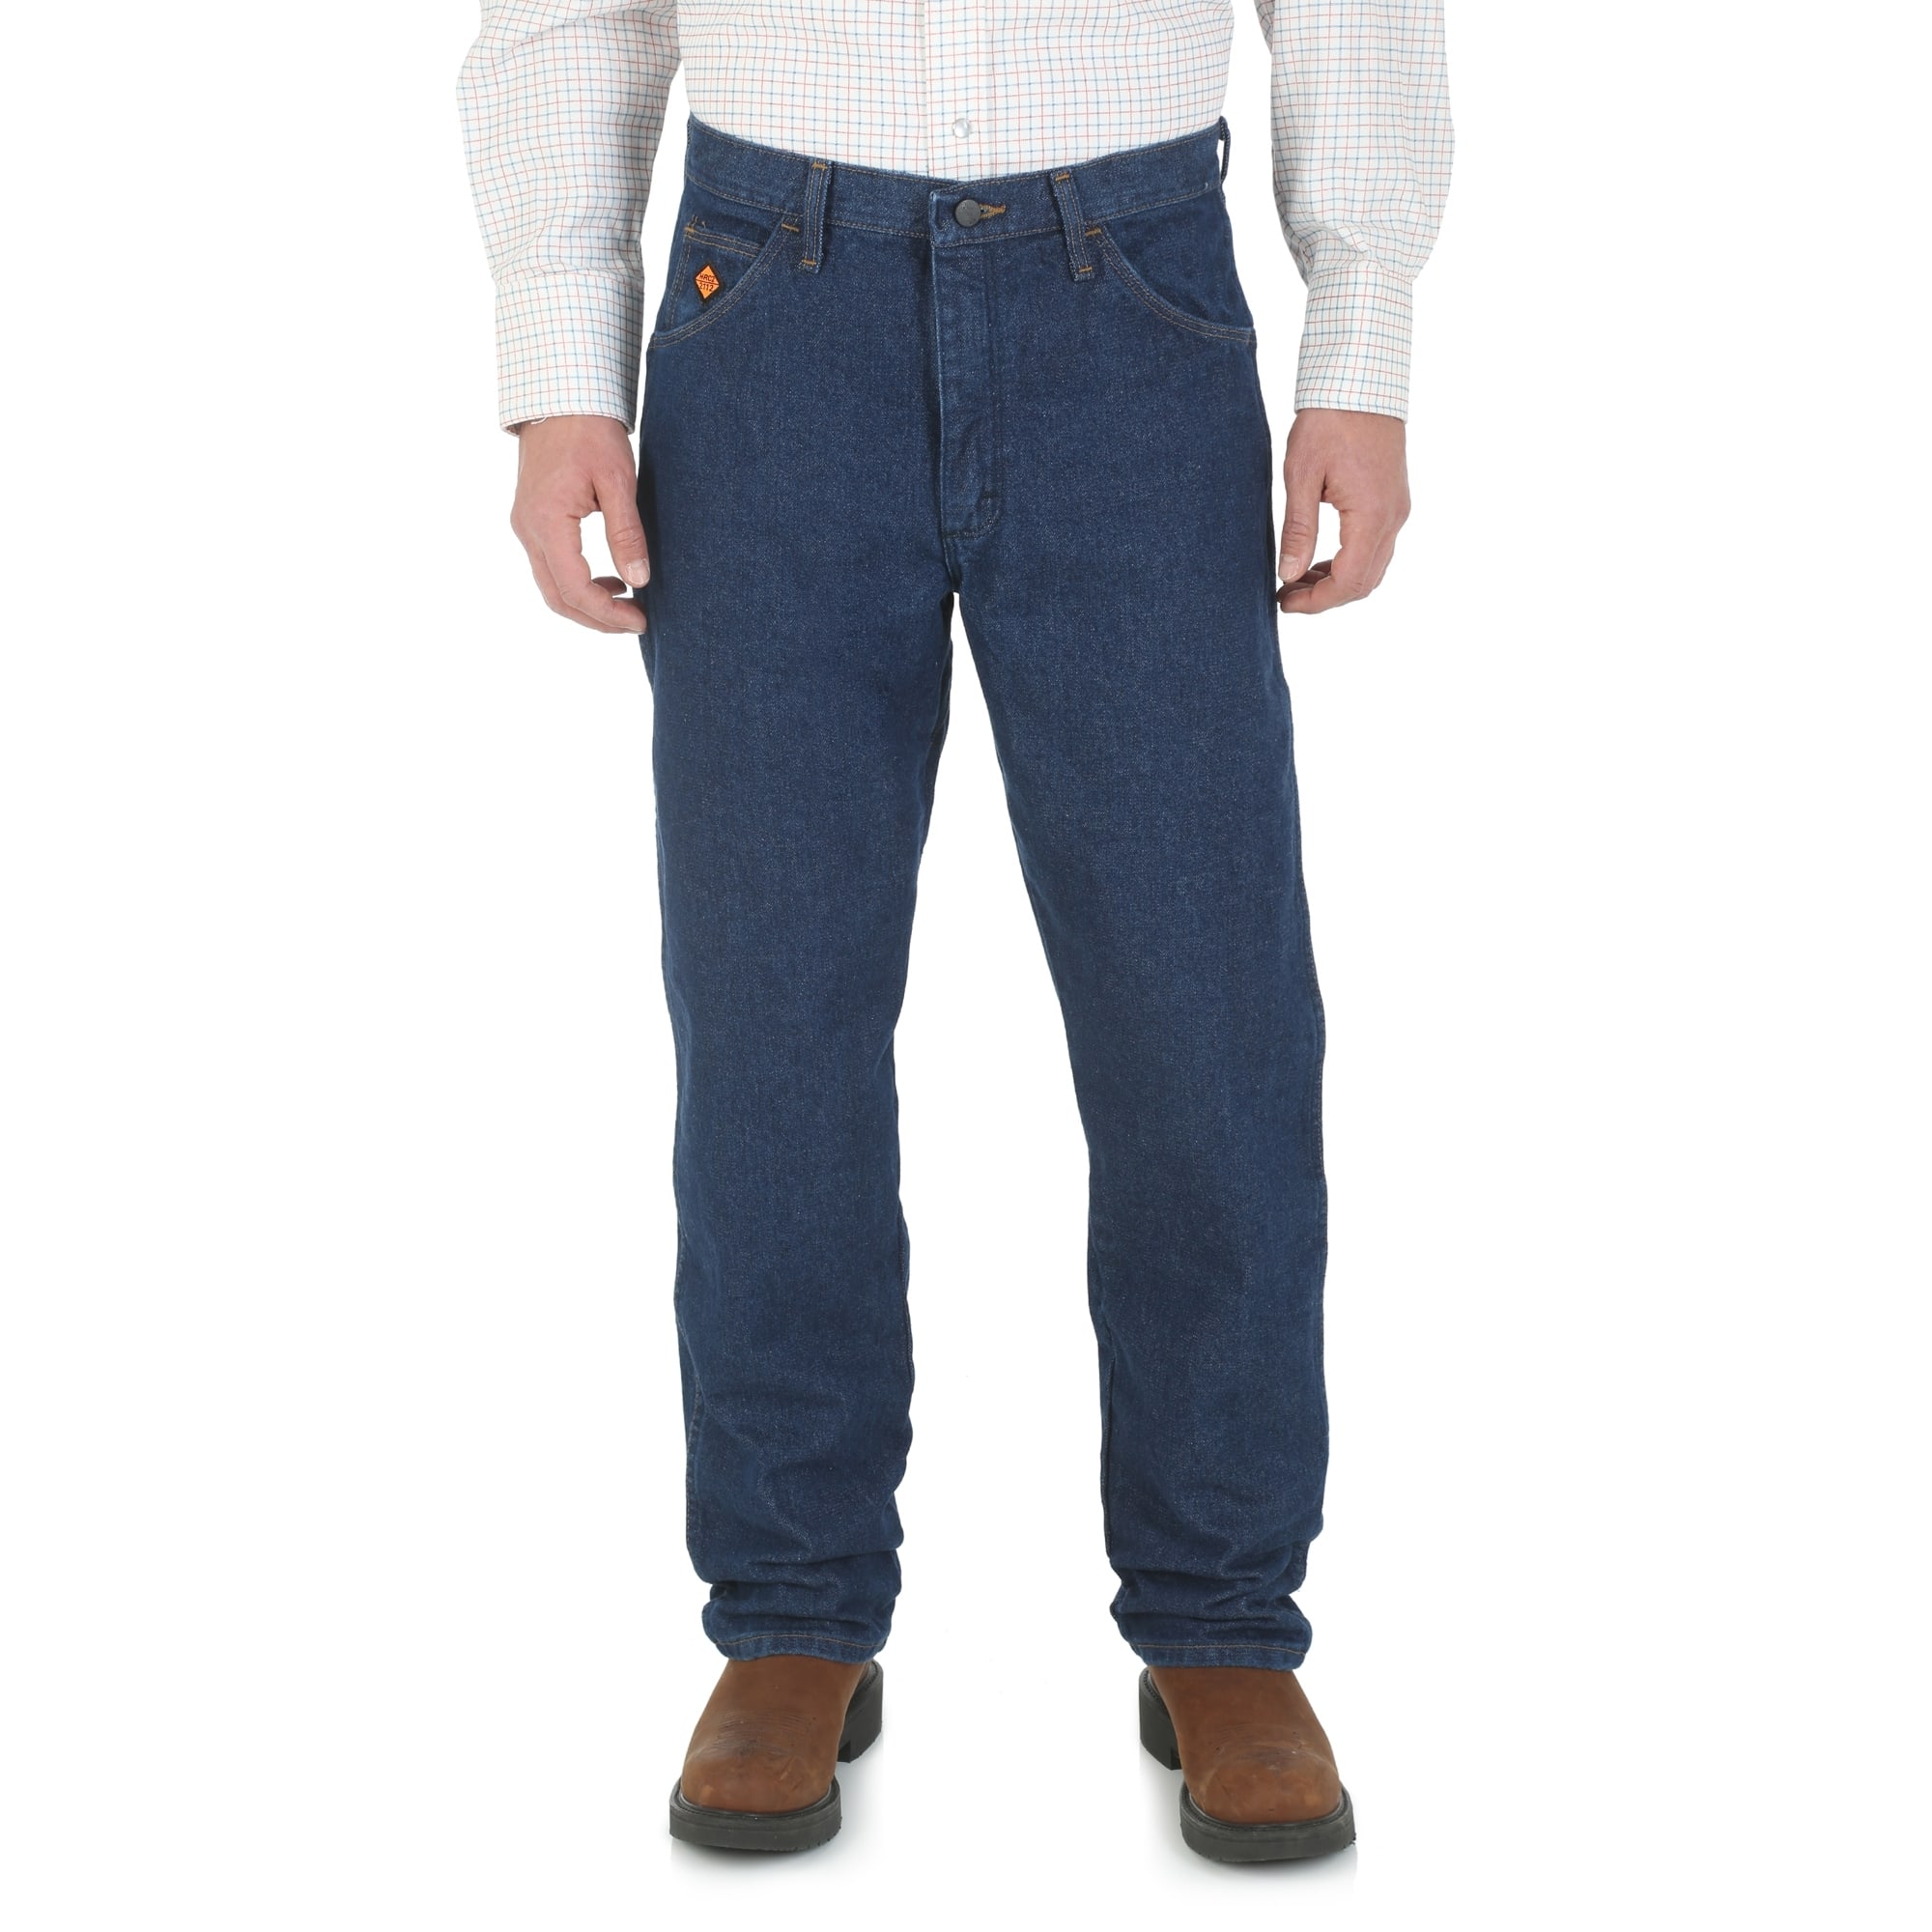 relaxed fit wrangler jeans mens